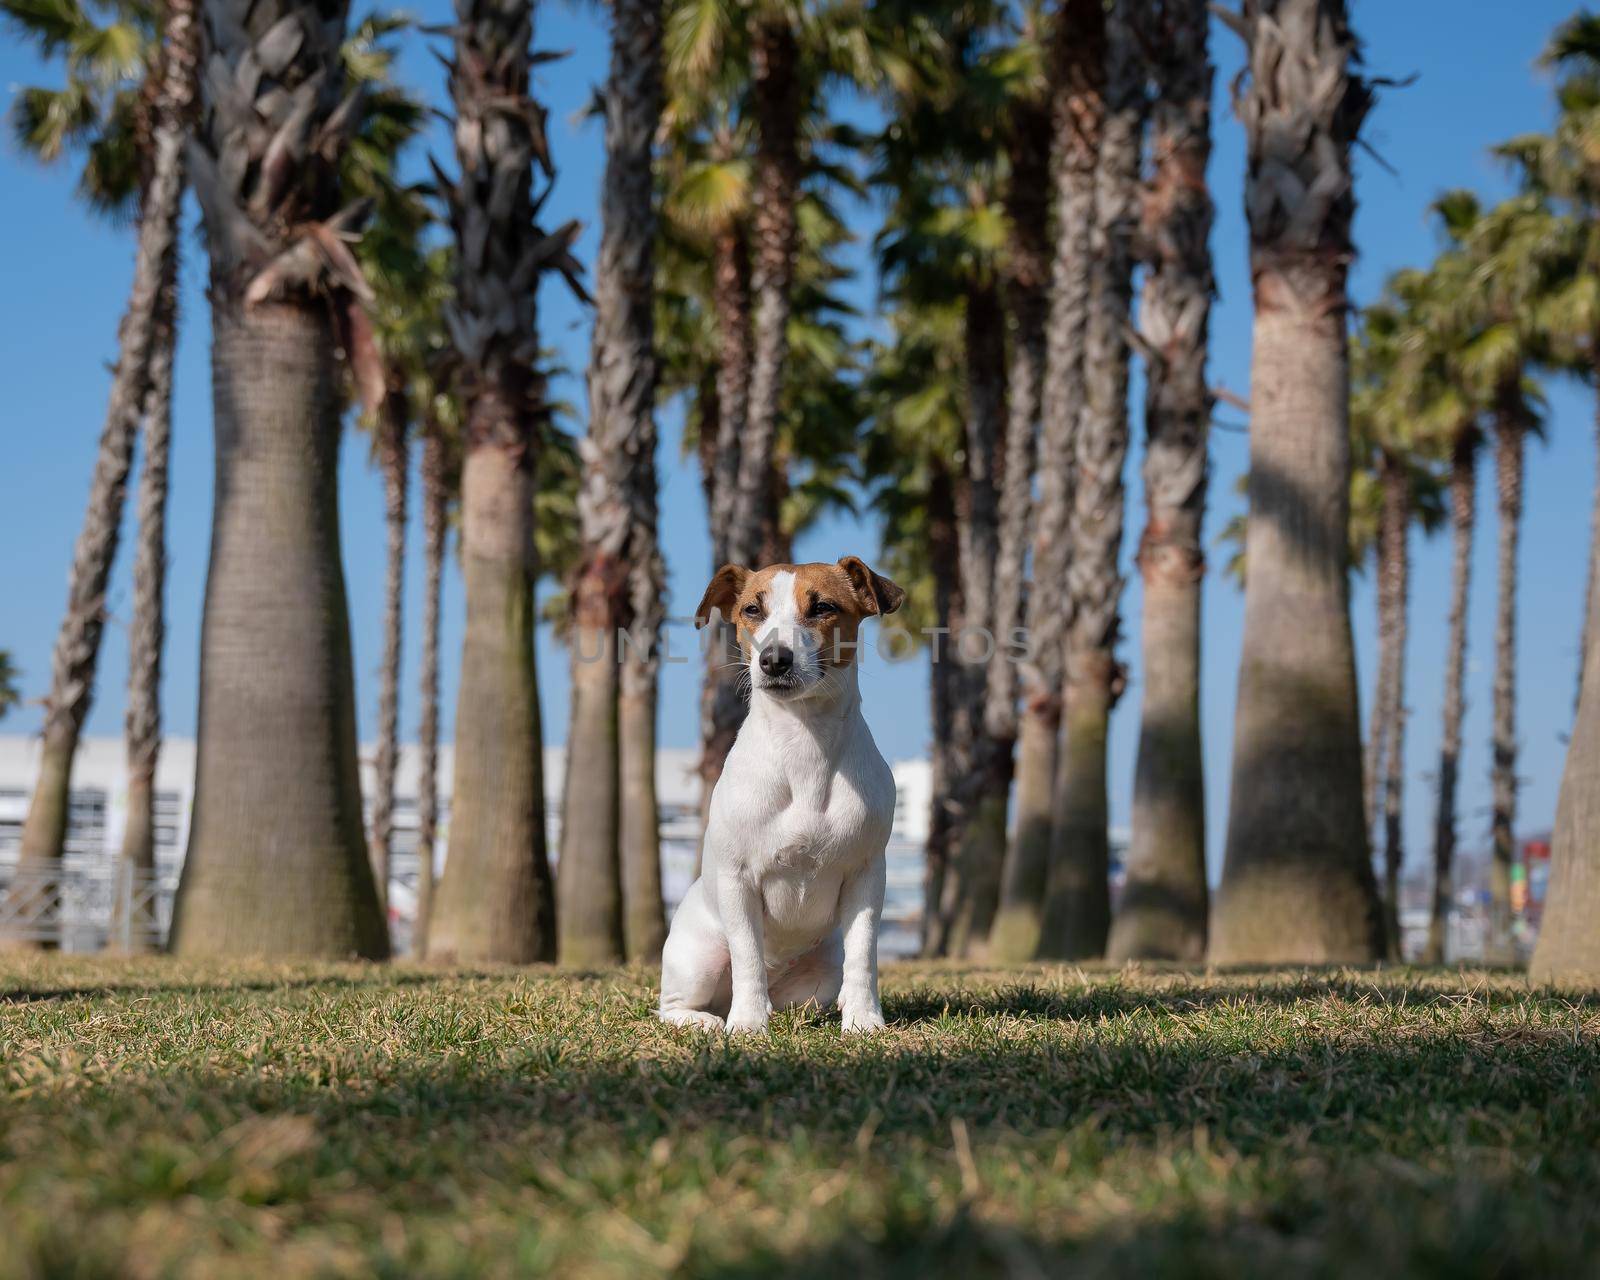 Jack Russell Terrier dog sitting under palm trees